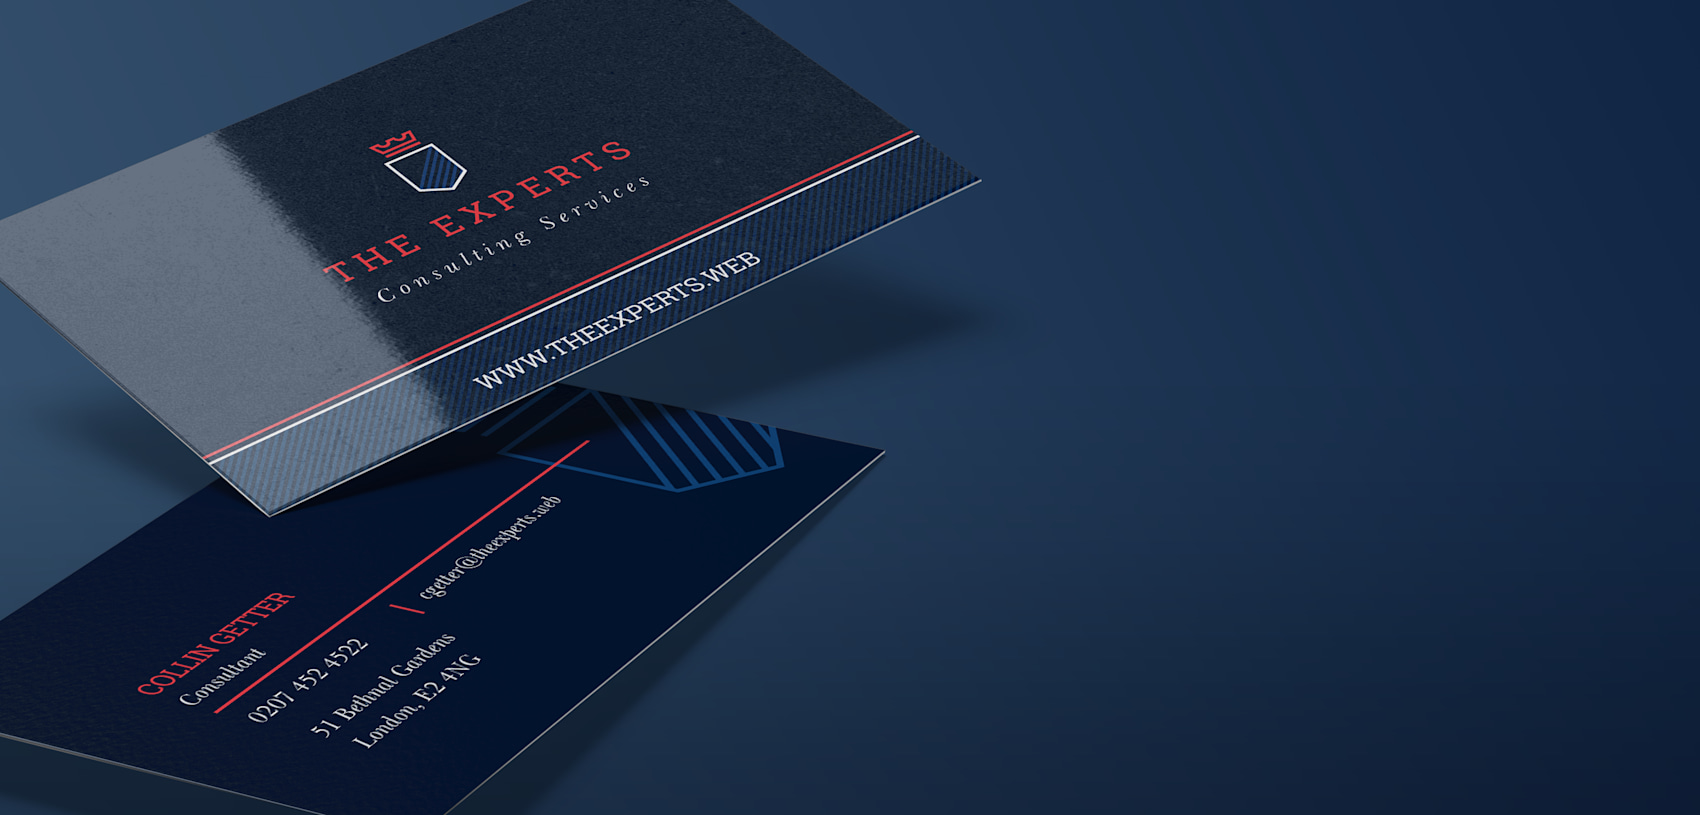 Larger version: Glossy business cards